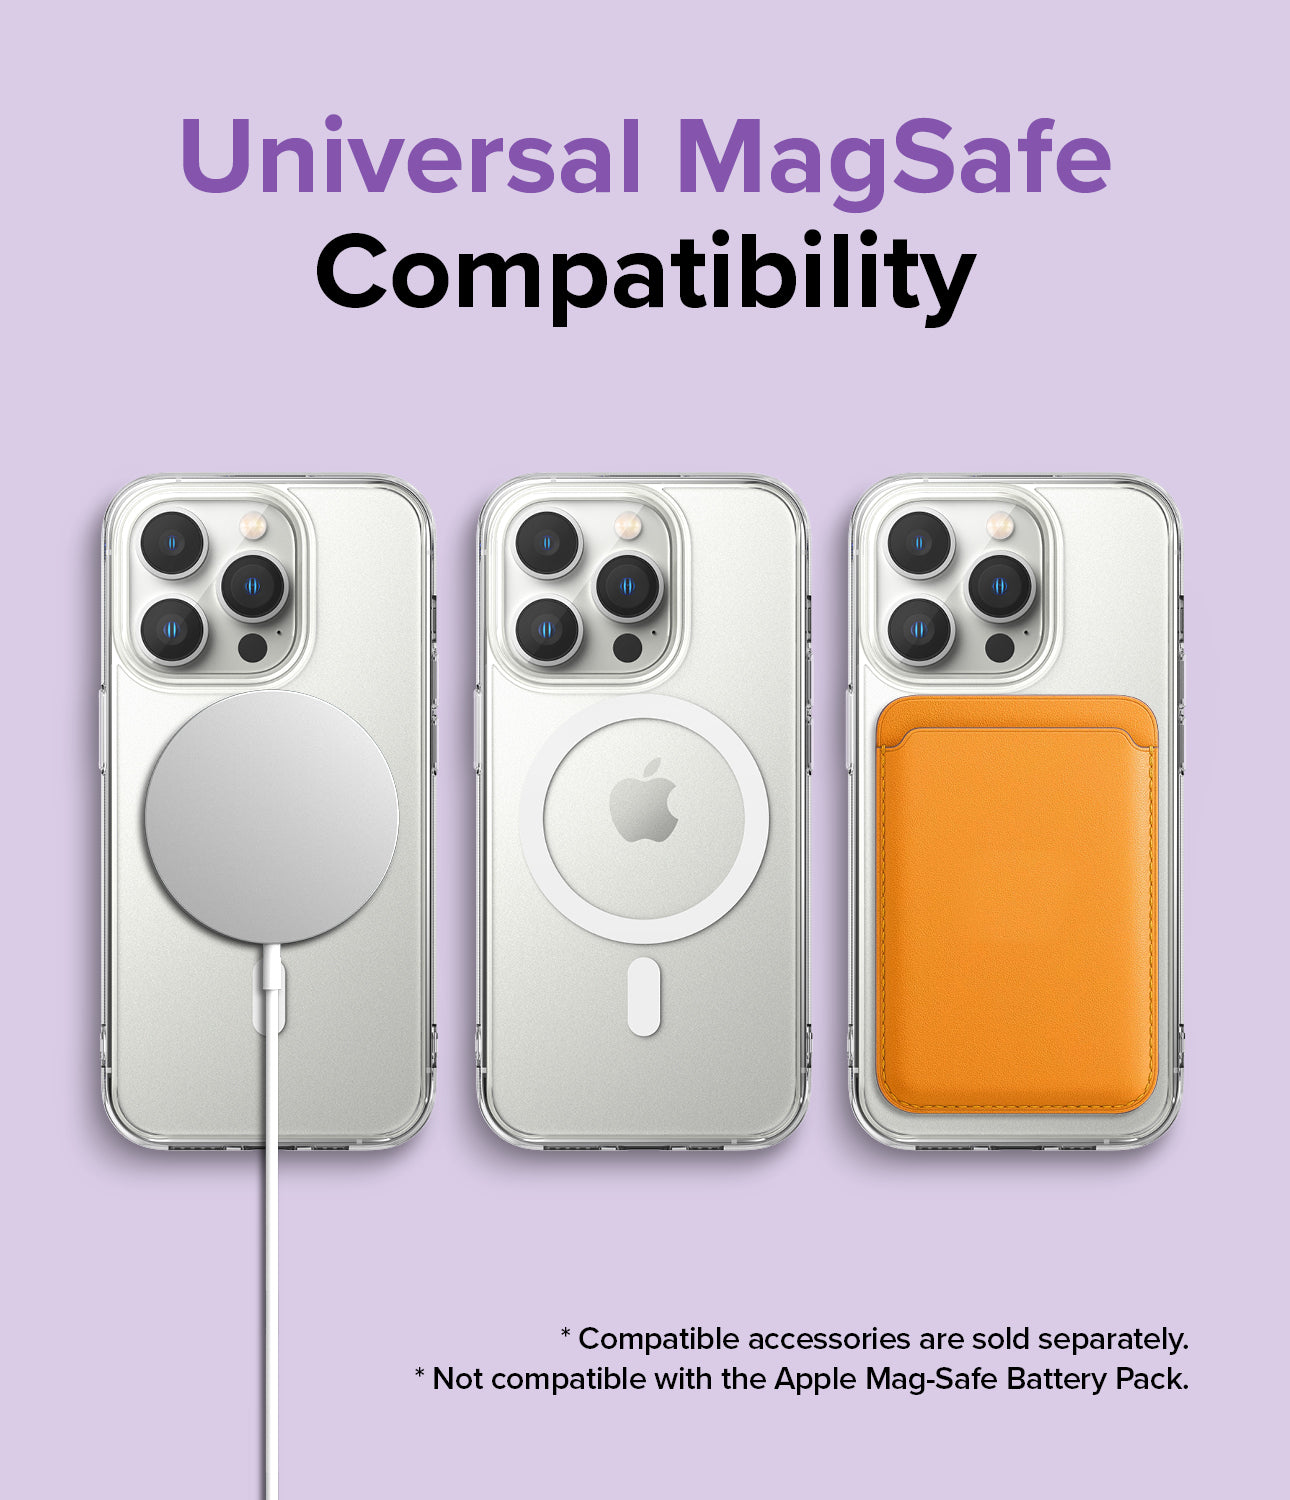 iPhone 14 Pro Case | Fusion Magnetic Matte - Universal MagSafe Compatibility.